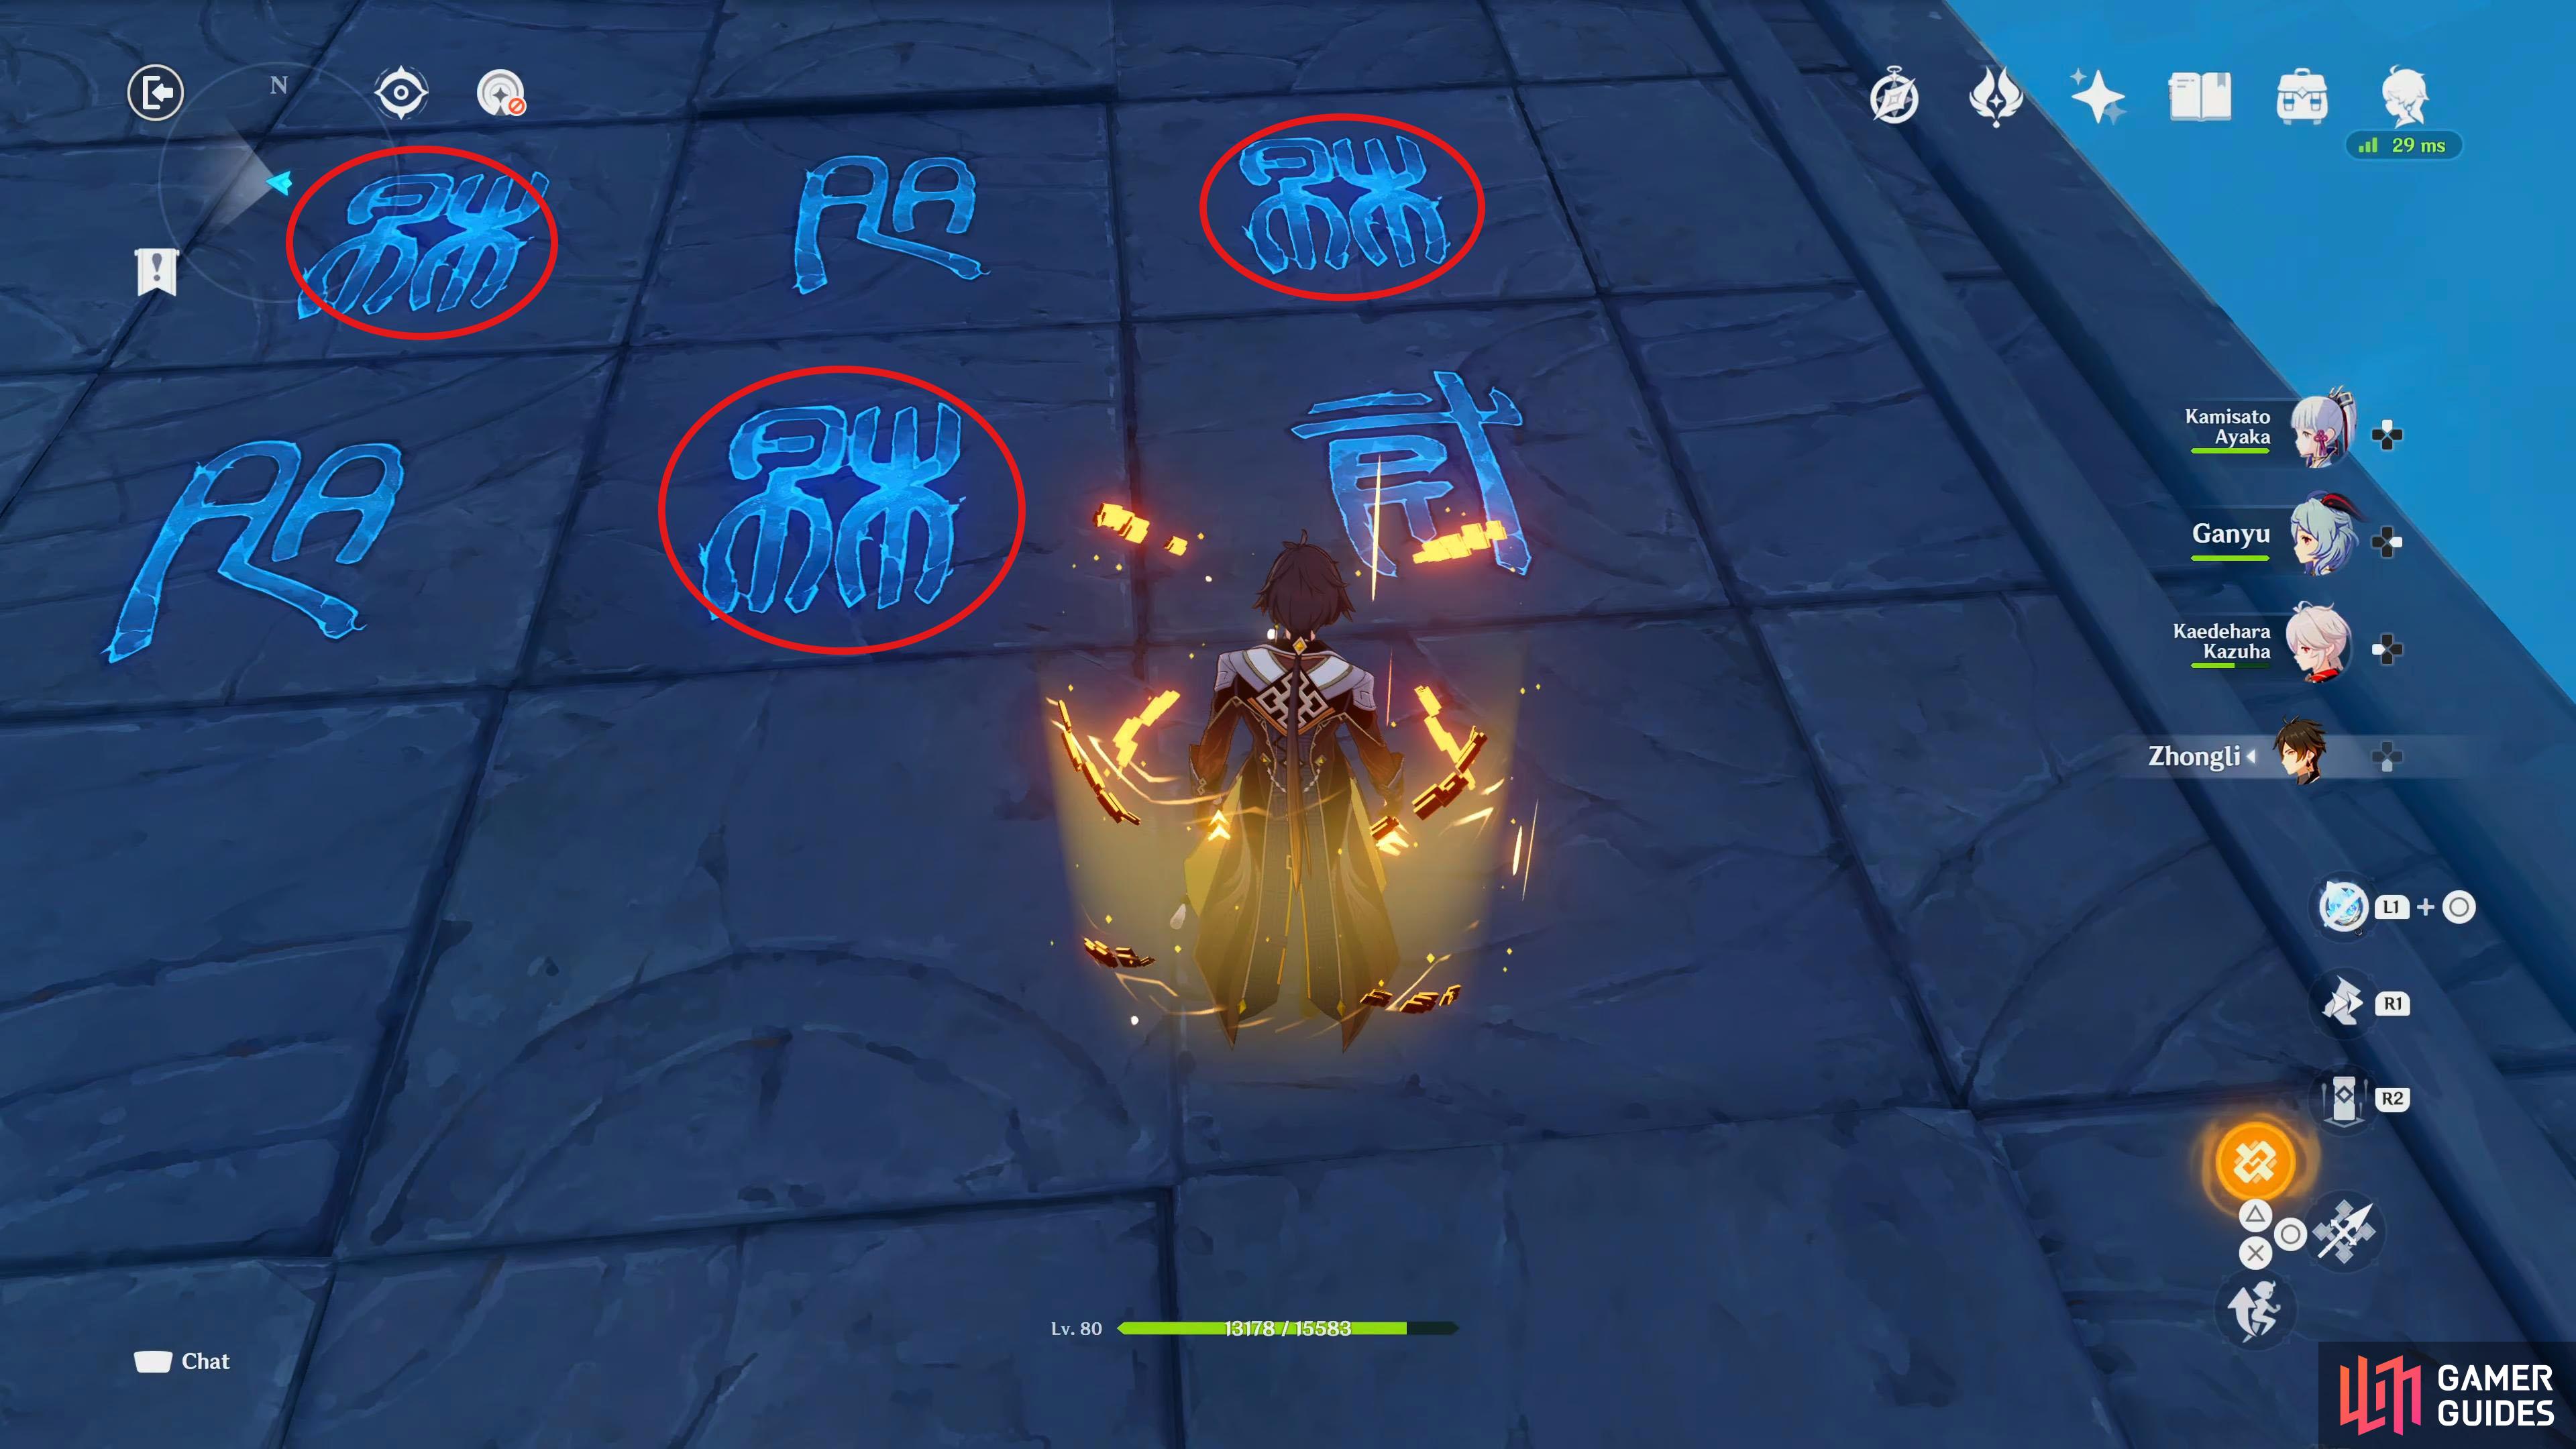 This group of runes has three runes that need to be activated.